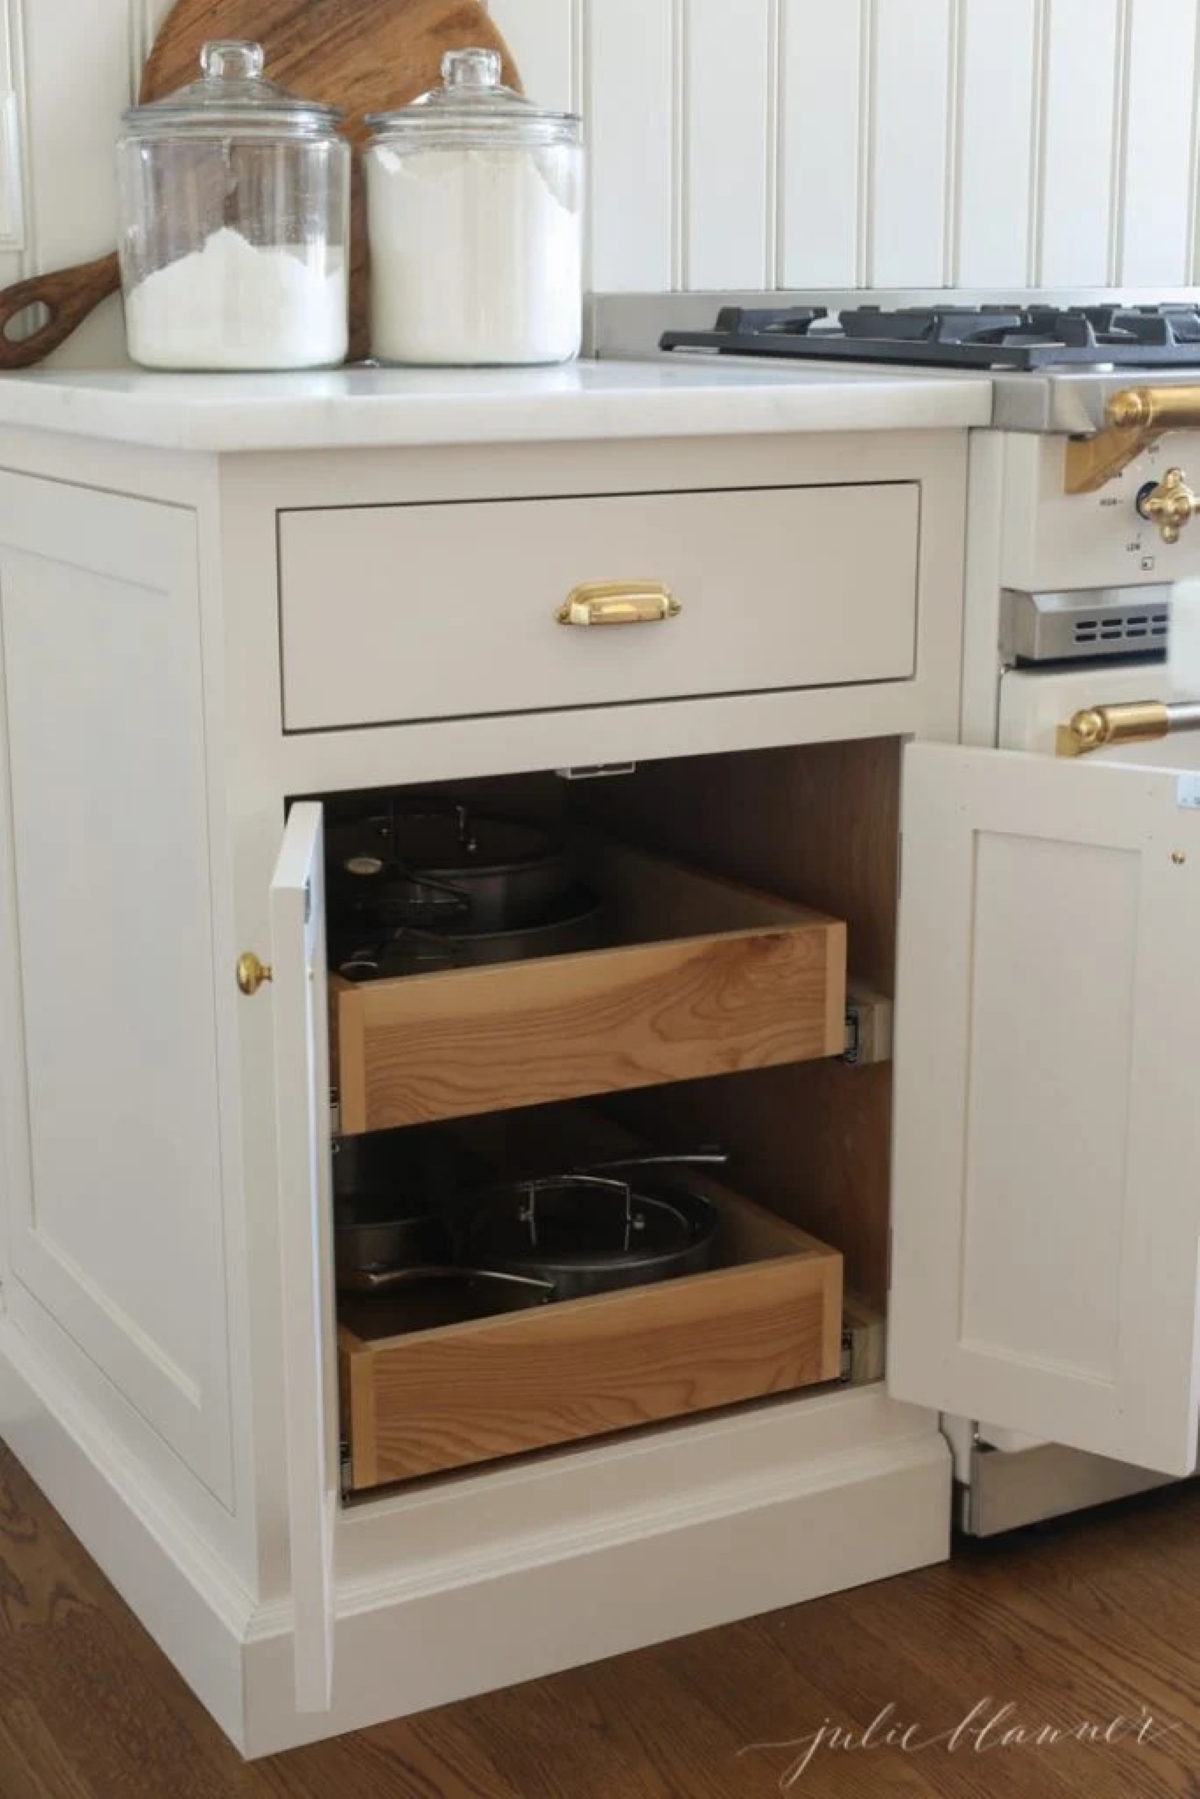 Pull out drawers for pots and pans storage in a kitchen cabinet by a French range.